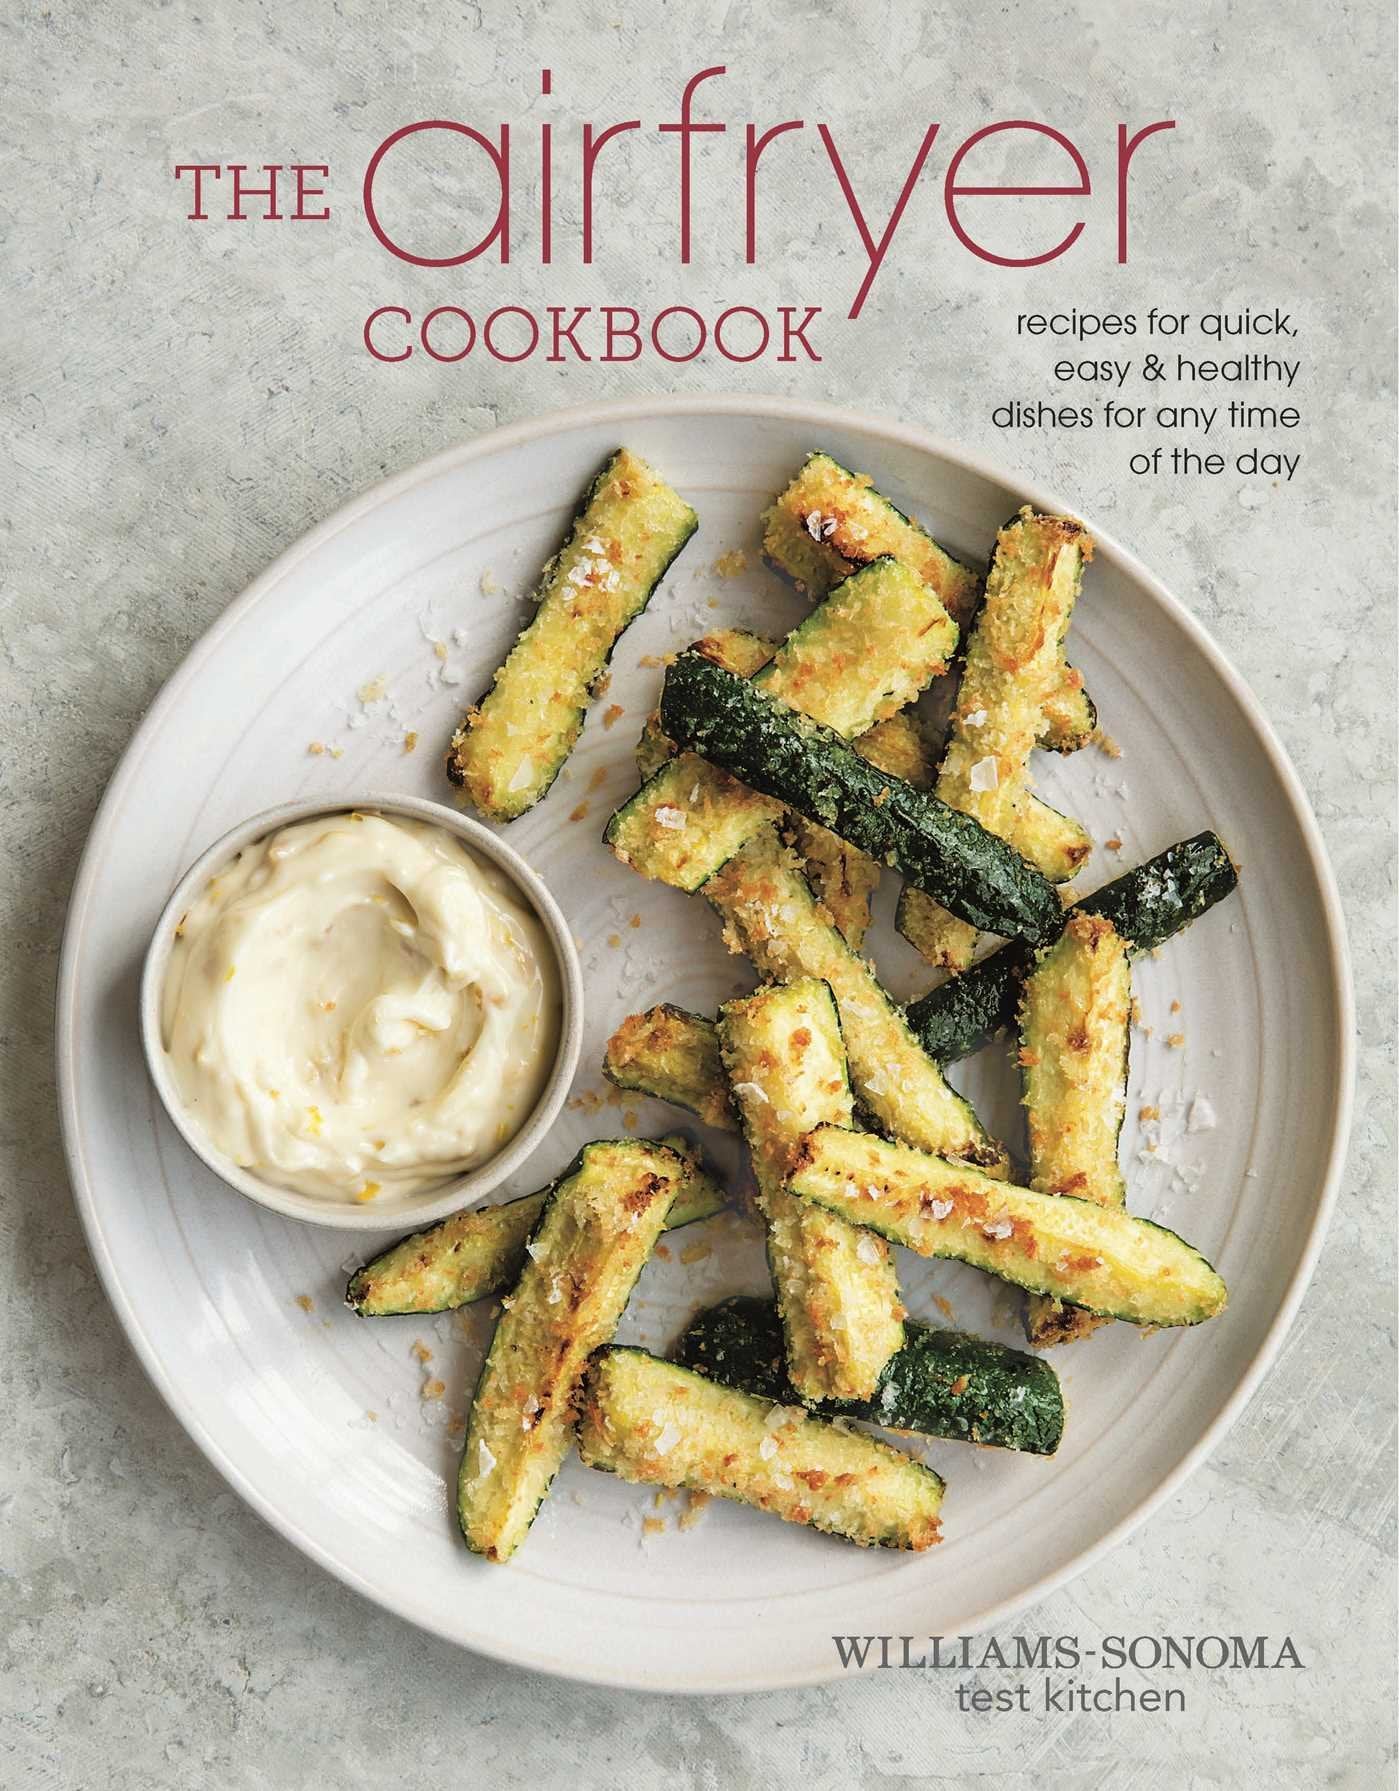 The Air Fryer Cookbook: Recipes for Quick, Easy & Healthy Dishes for Any Time of The Day (Williams-Sonoma Test Kitchen)